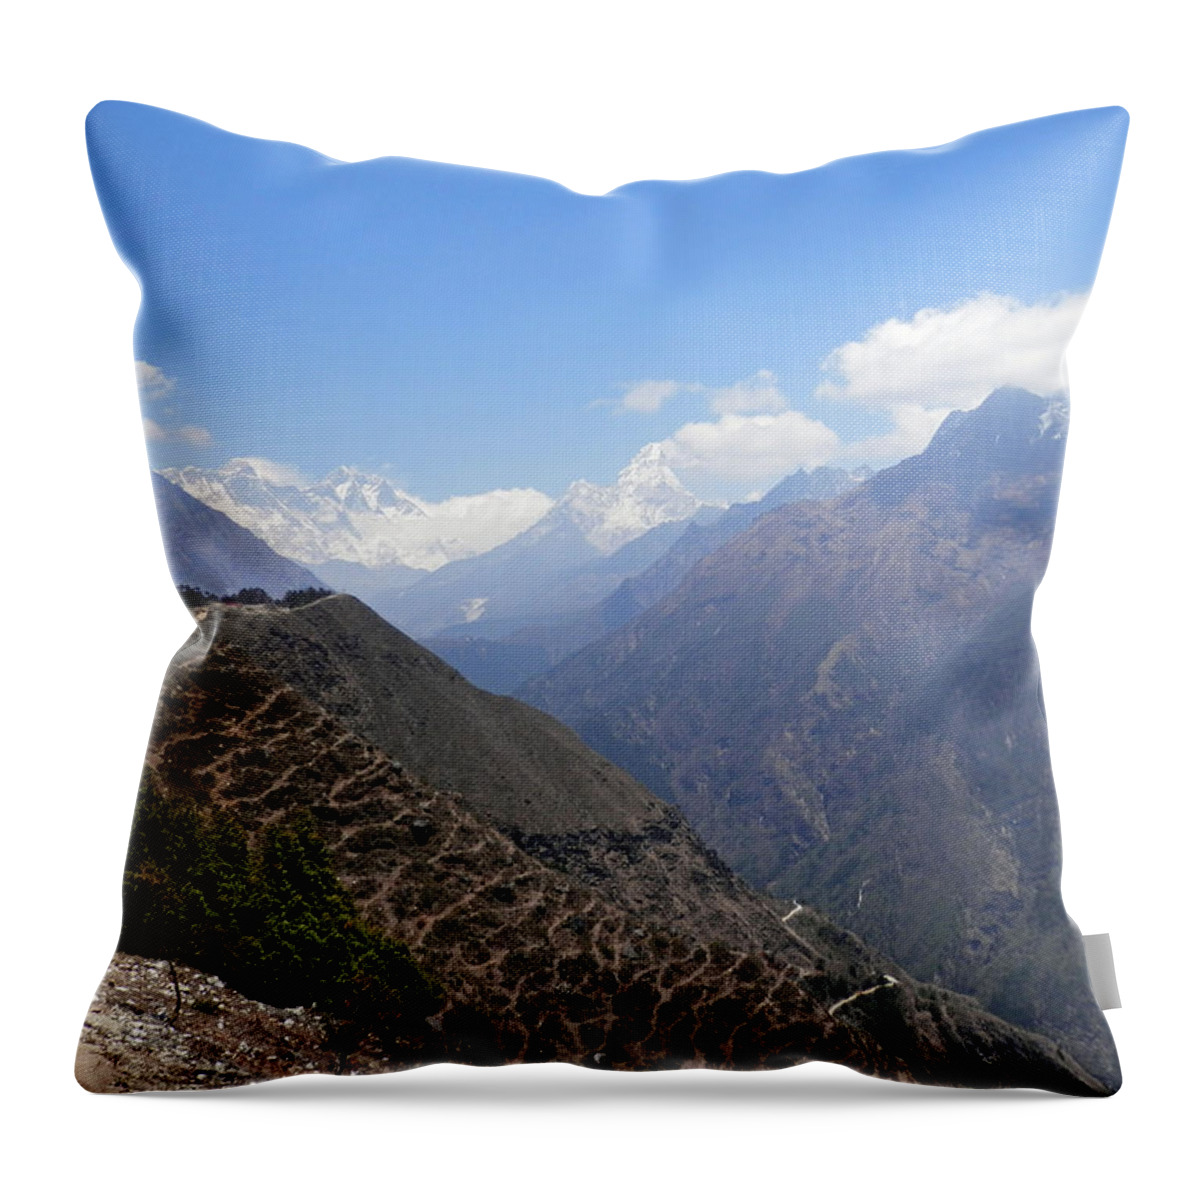 Mountains Throw Pillow featuring the photograph Dizzying Heights by Pema Hou